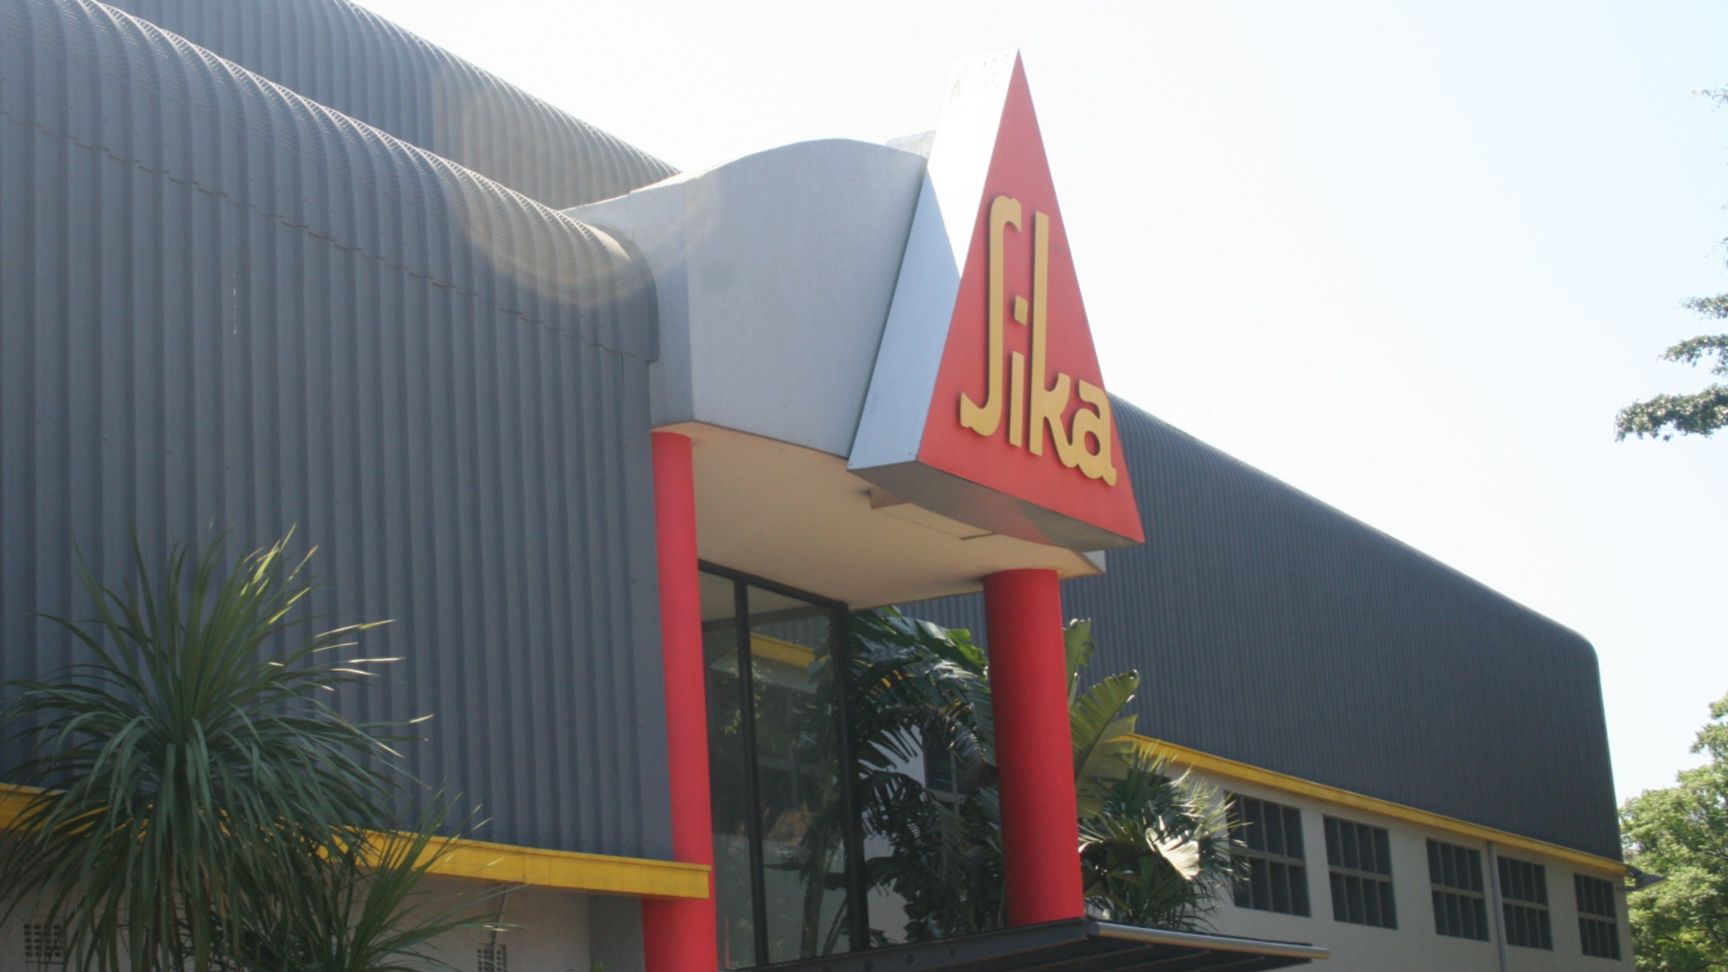 Sika South Africa Head Office Building in Westmead, KZN